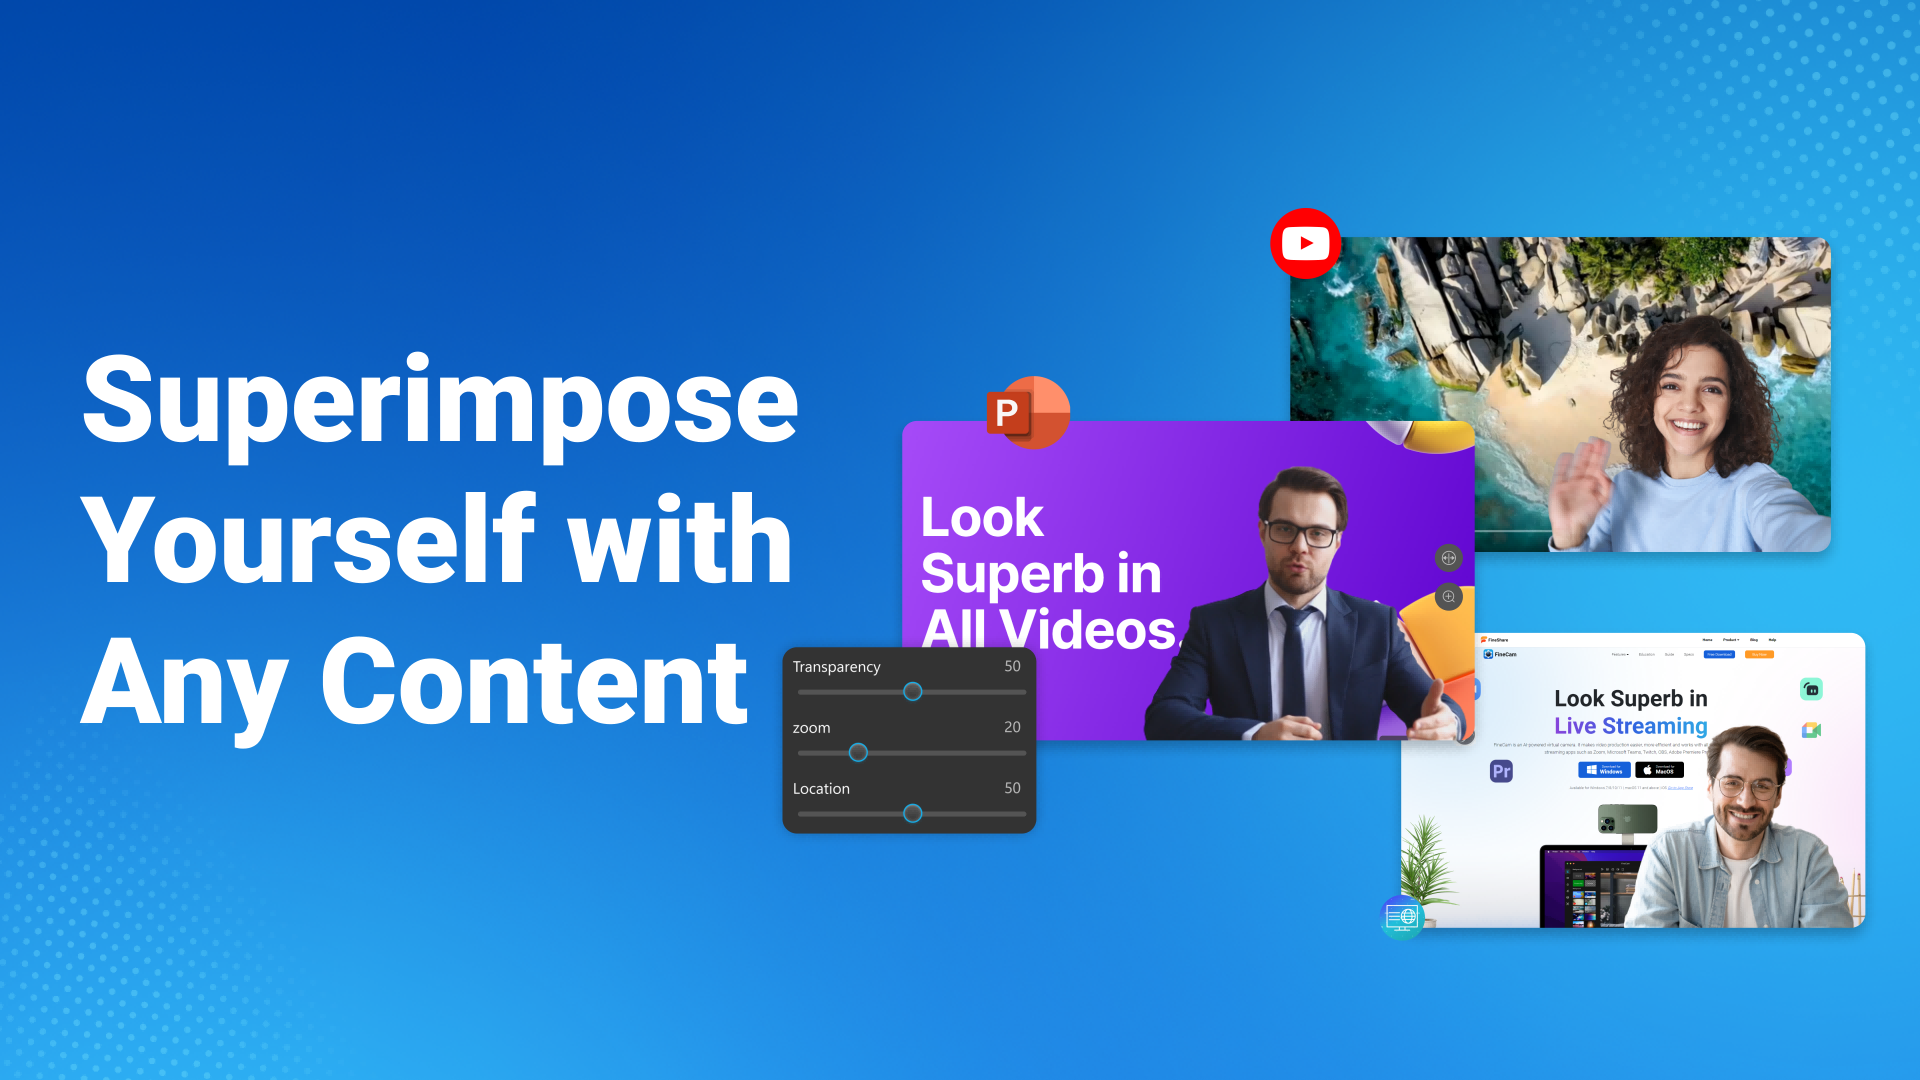 FineCam - Superimpose Yourself with Any Content